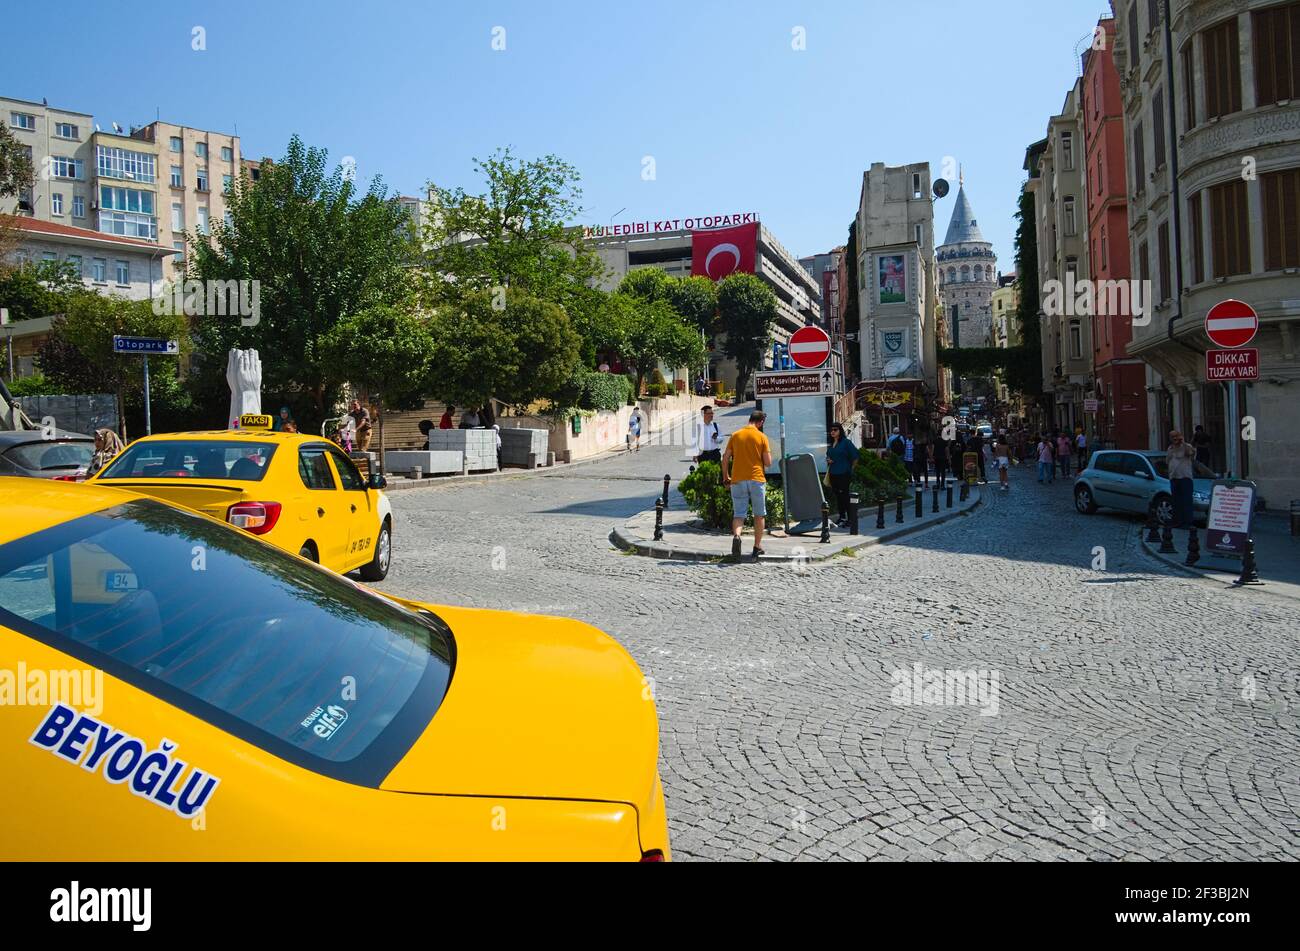 Istanbul, Turkey - September, 2018: Yellow taxi cabs near the square near Galata Tower in Beyoglu district. Taxi with Beyoglu name sign. Stock Photo